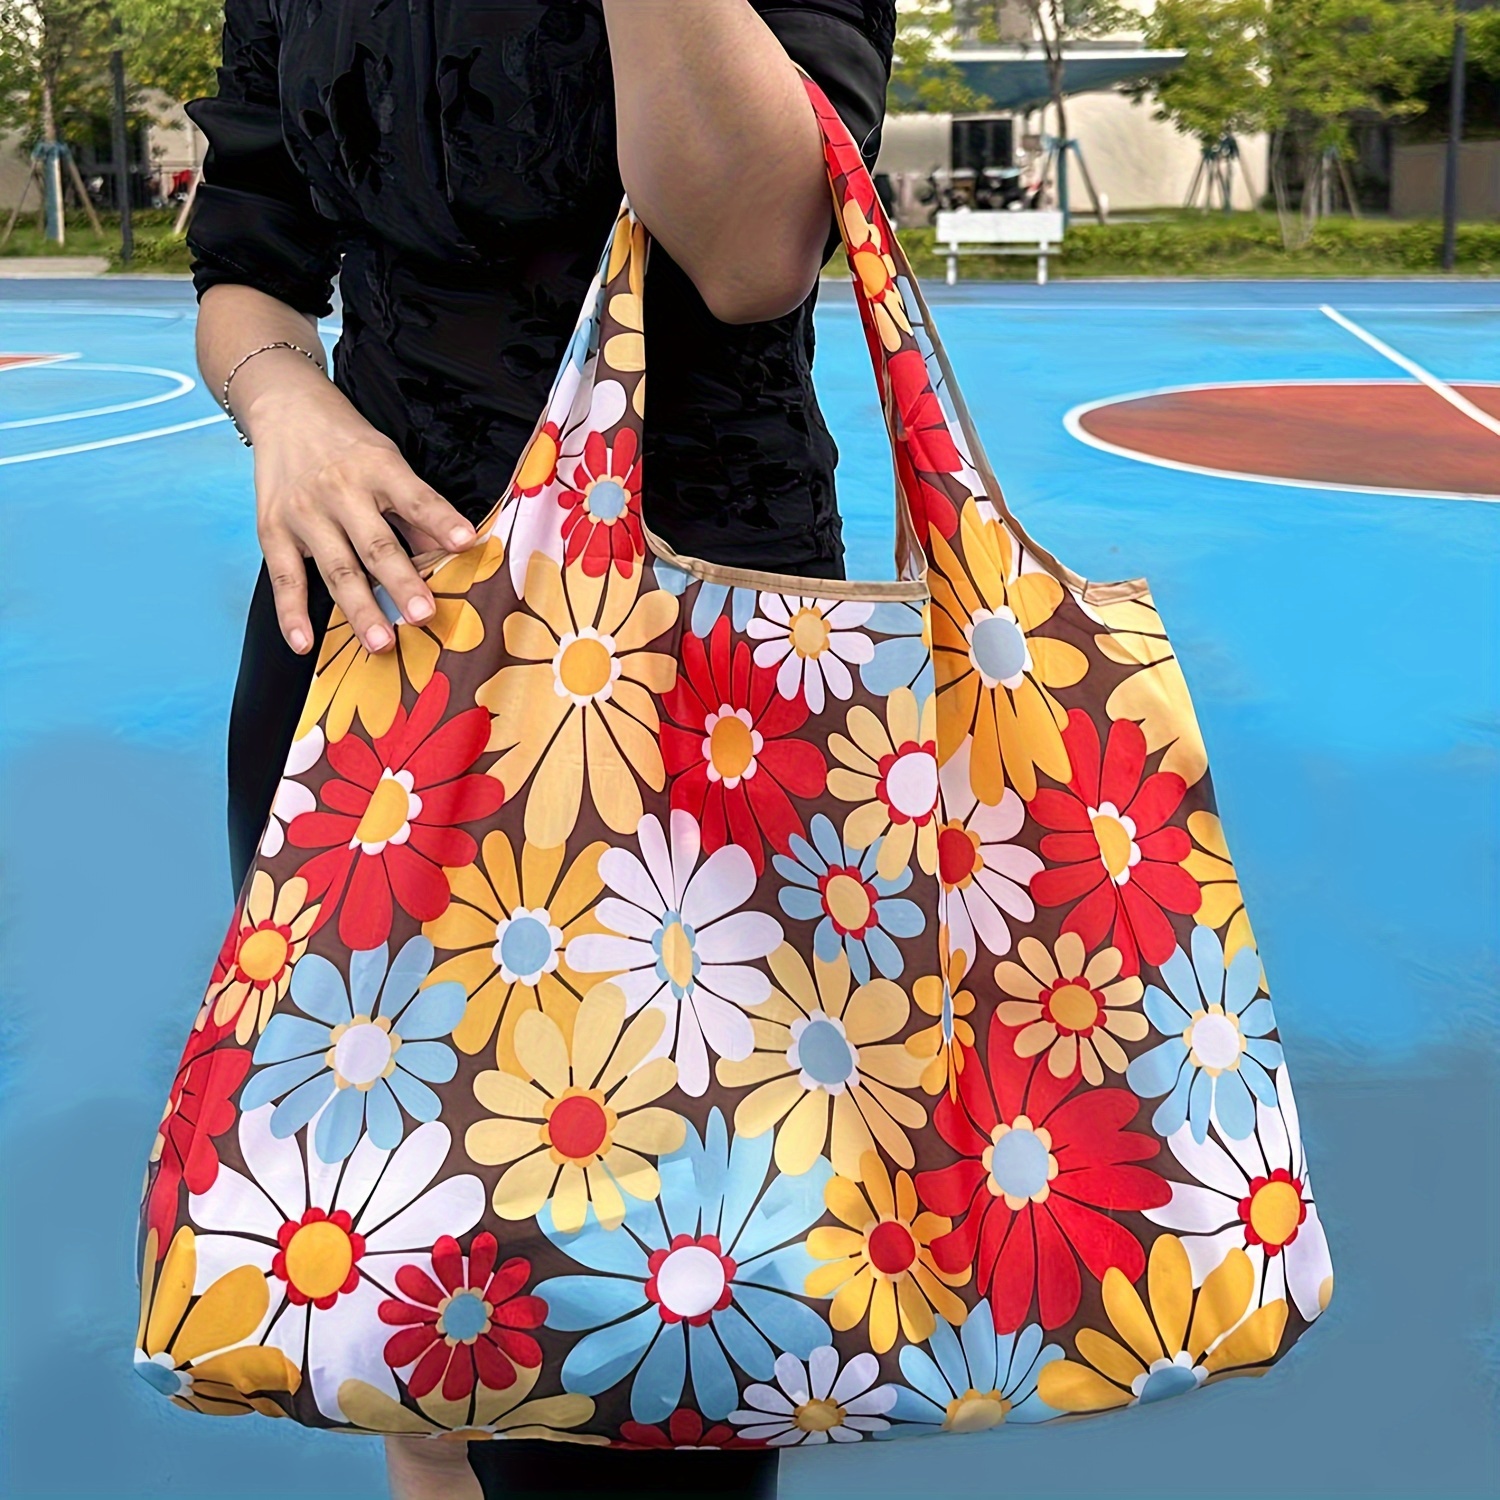 

Waterproof Large Capacity Bag, Portable Lightweight Shopping Bag, Colorful Daisy Print Pattern Outdoor Portable Camping Travel Carry-on Luggage Bag